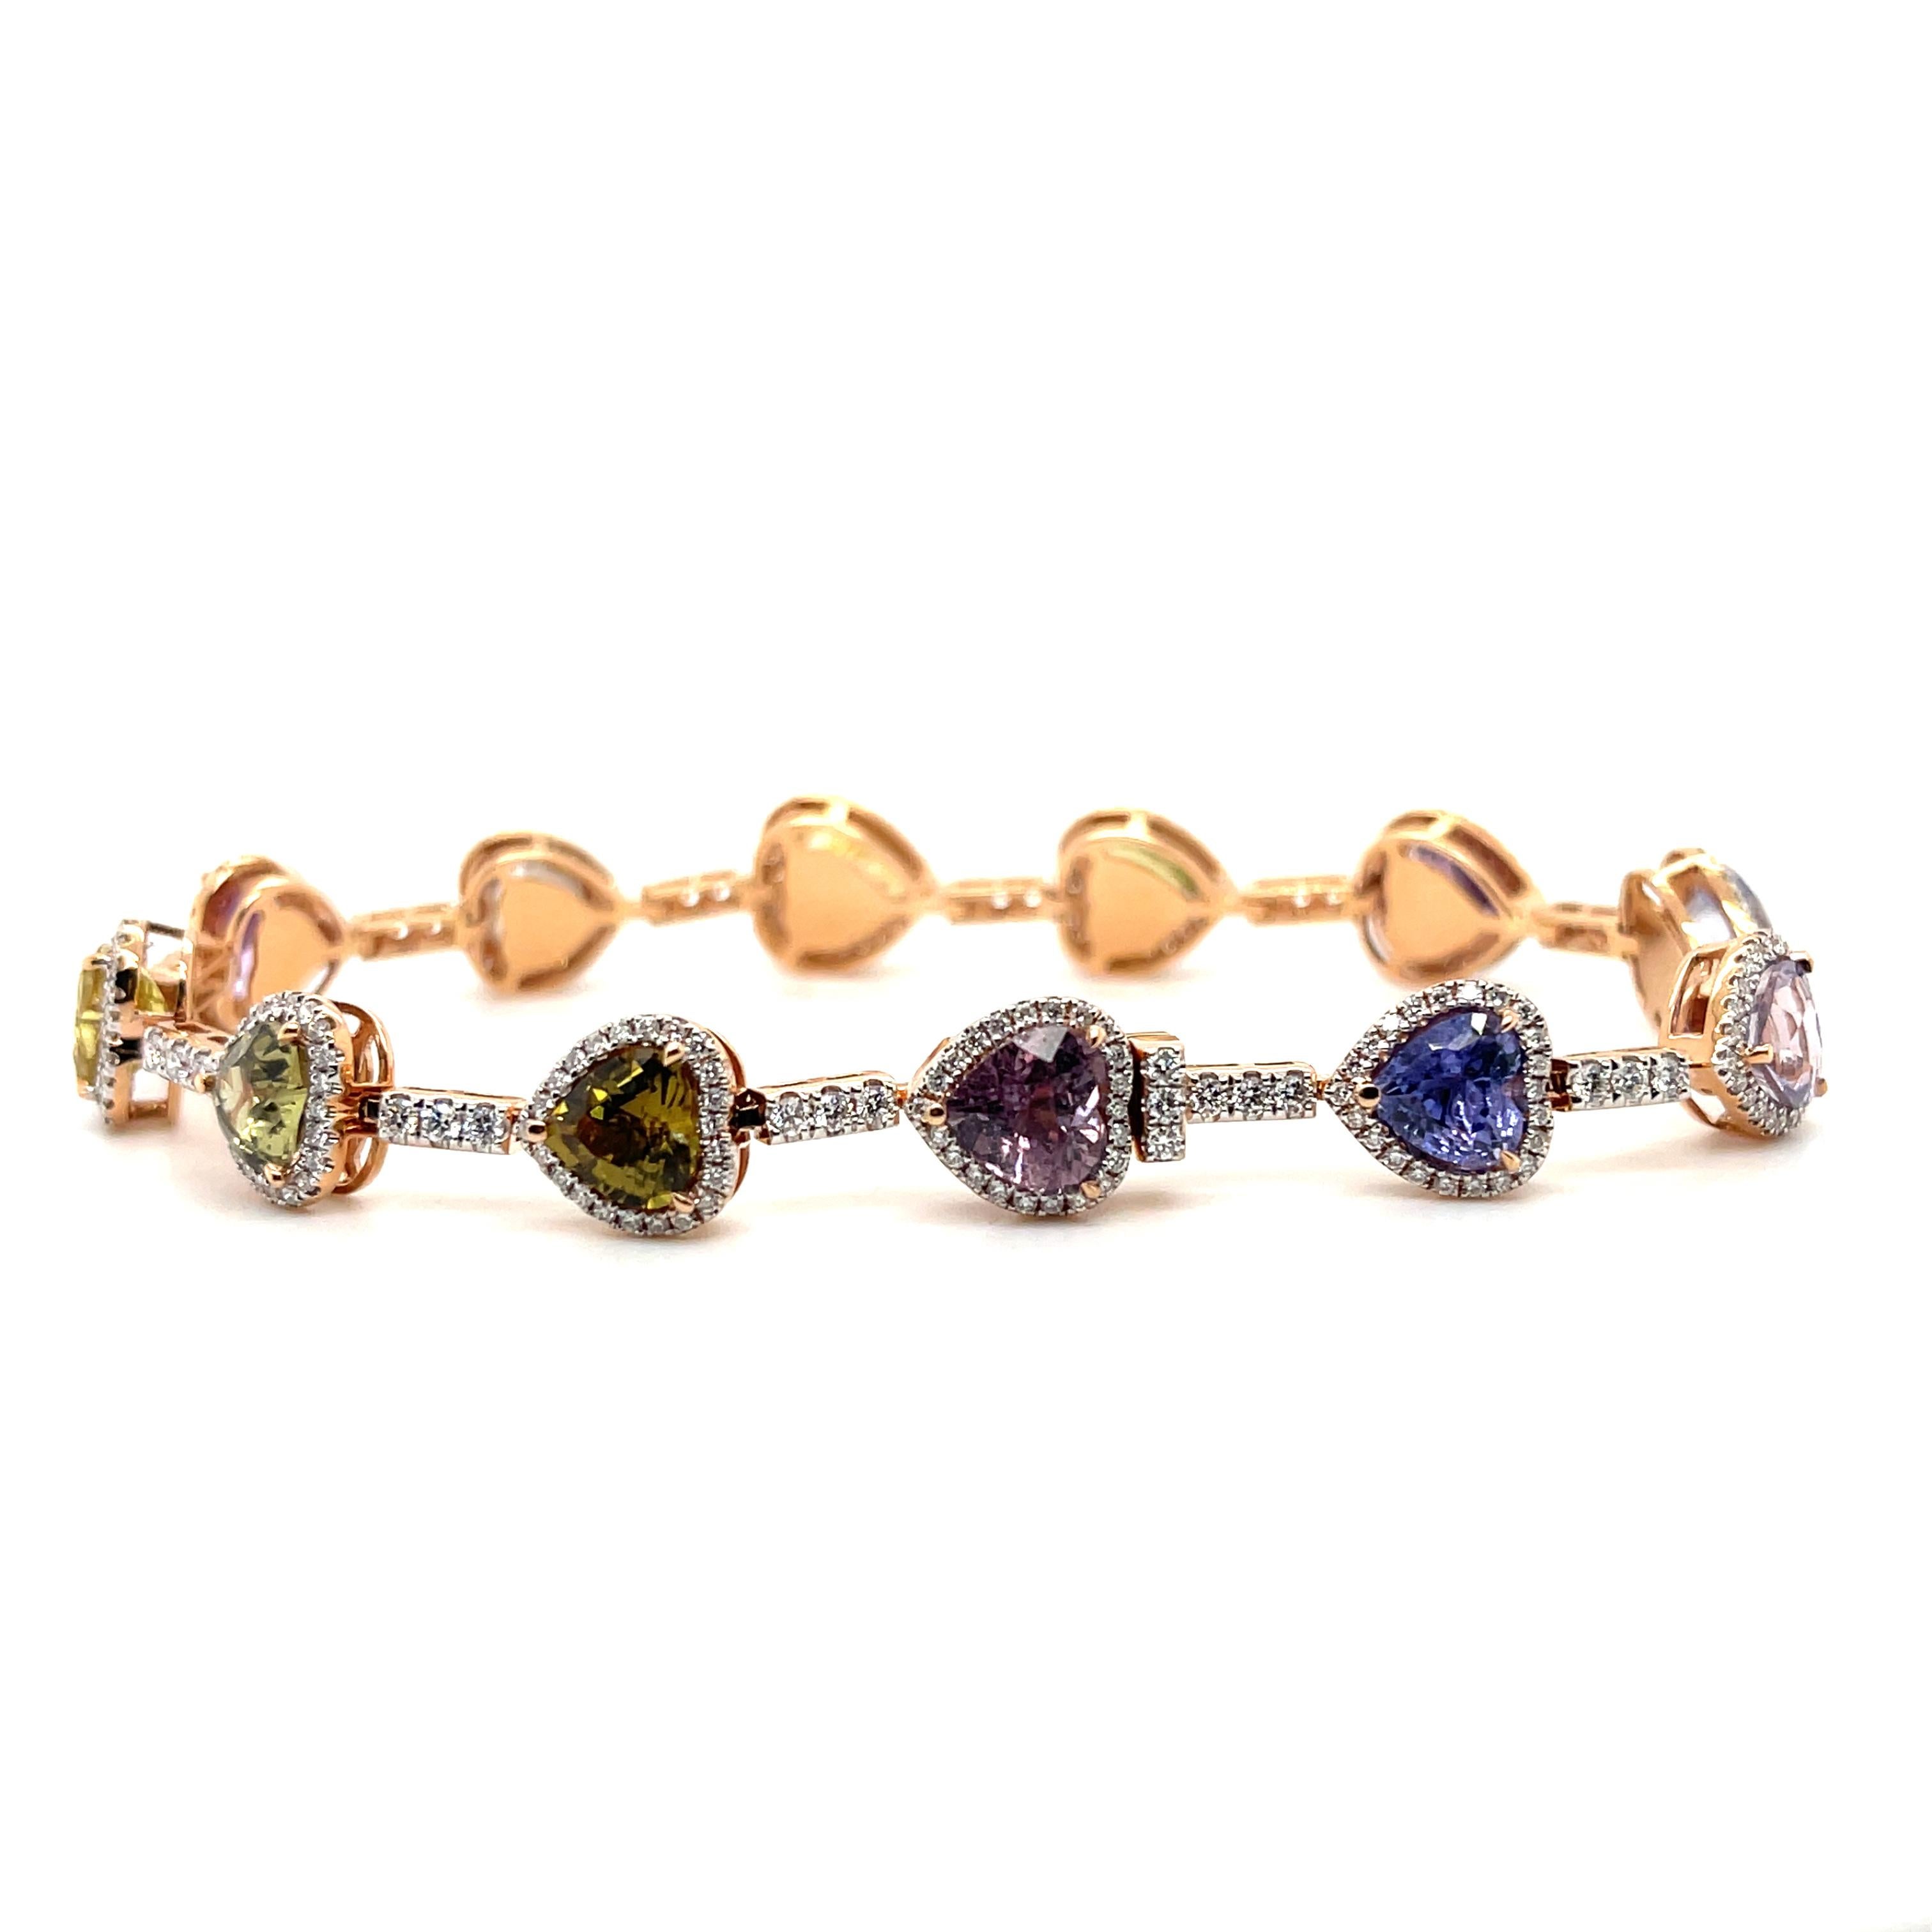 Multi coloured sapphires, crafted with eighteen karat rose gold, featuring a beautiful selection of three hundred and seventeen claw set round brilliant cut diamonds. complimented with a polished finish design.

Sapphires weight: 13.59ct

Sapphires